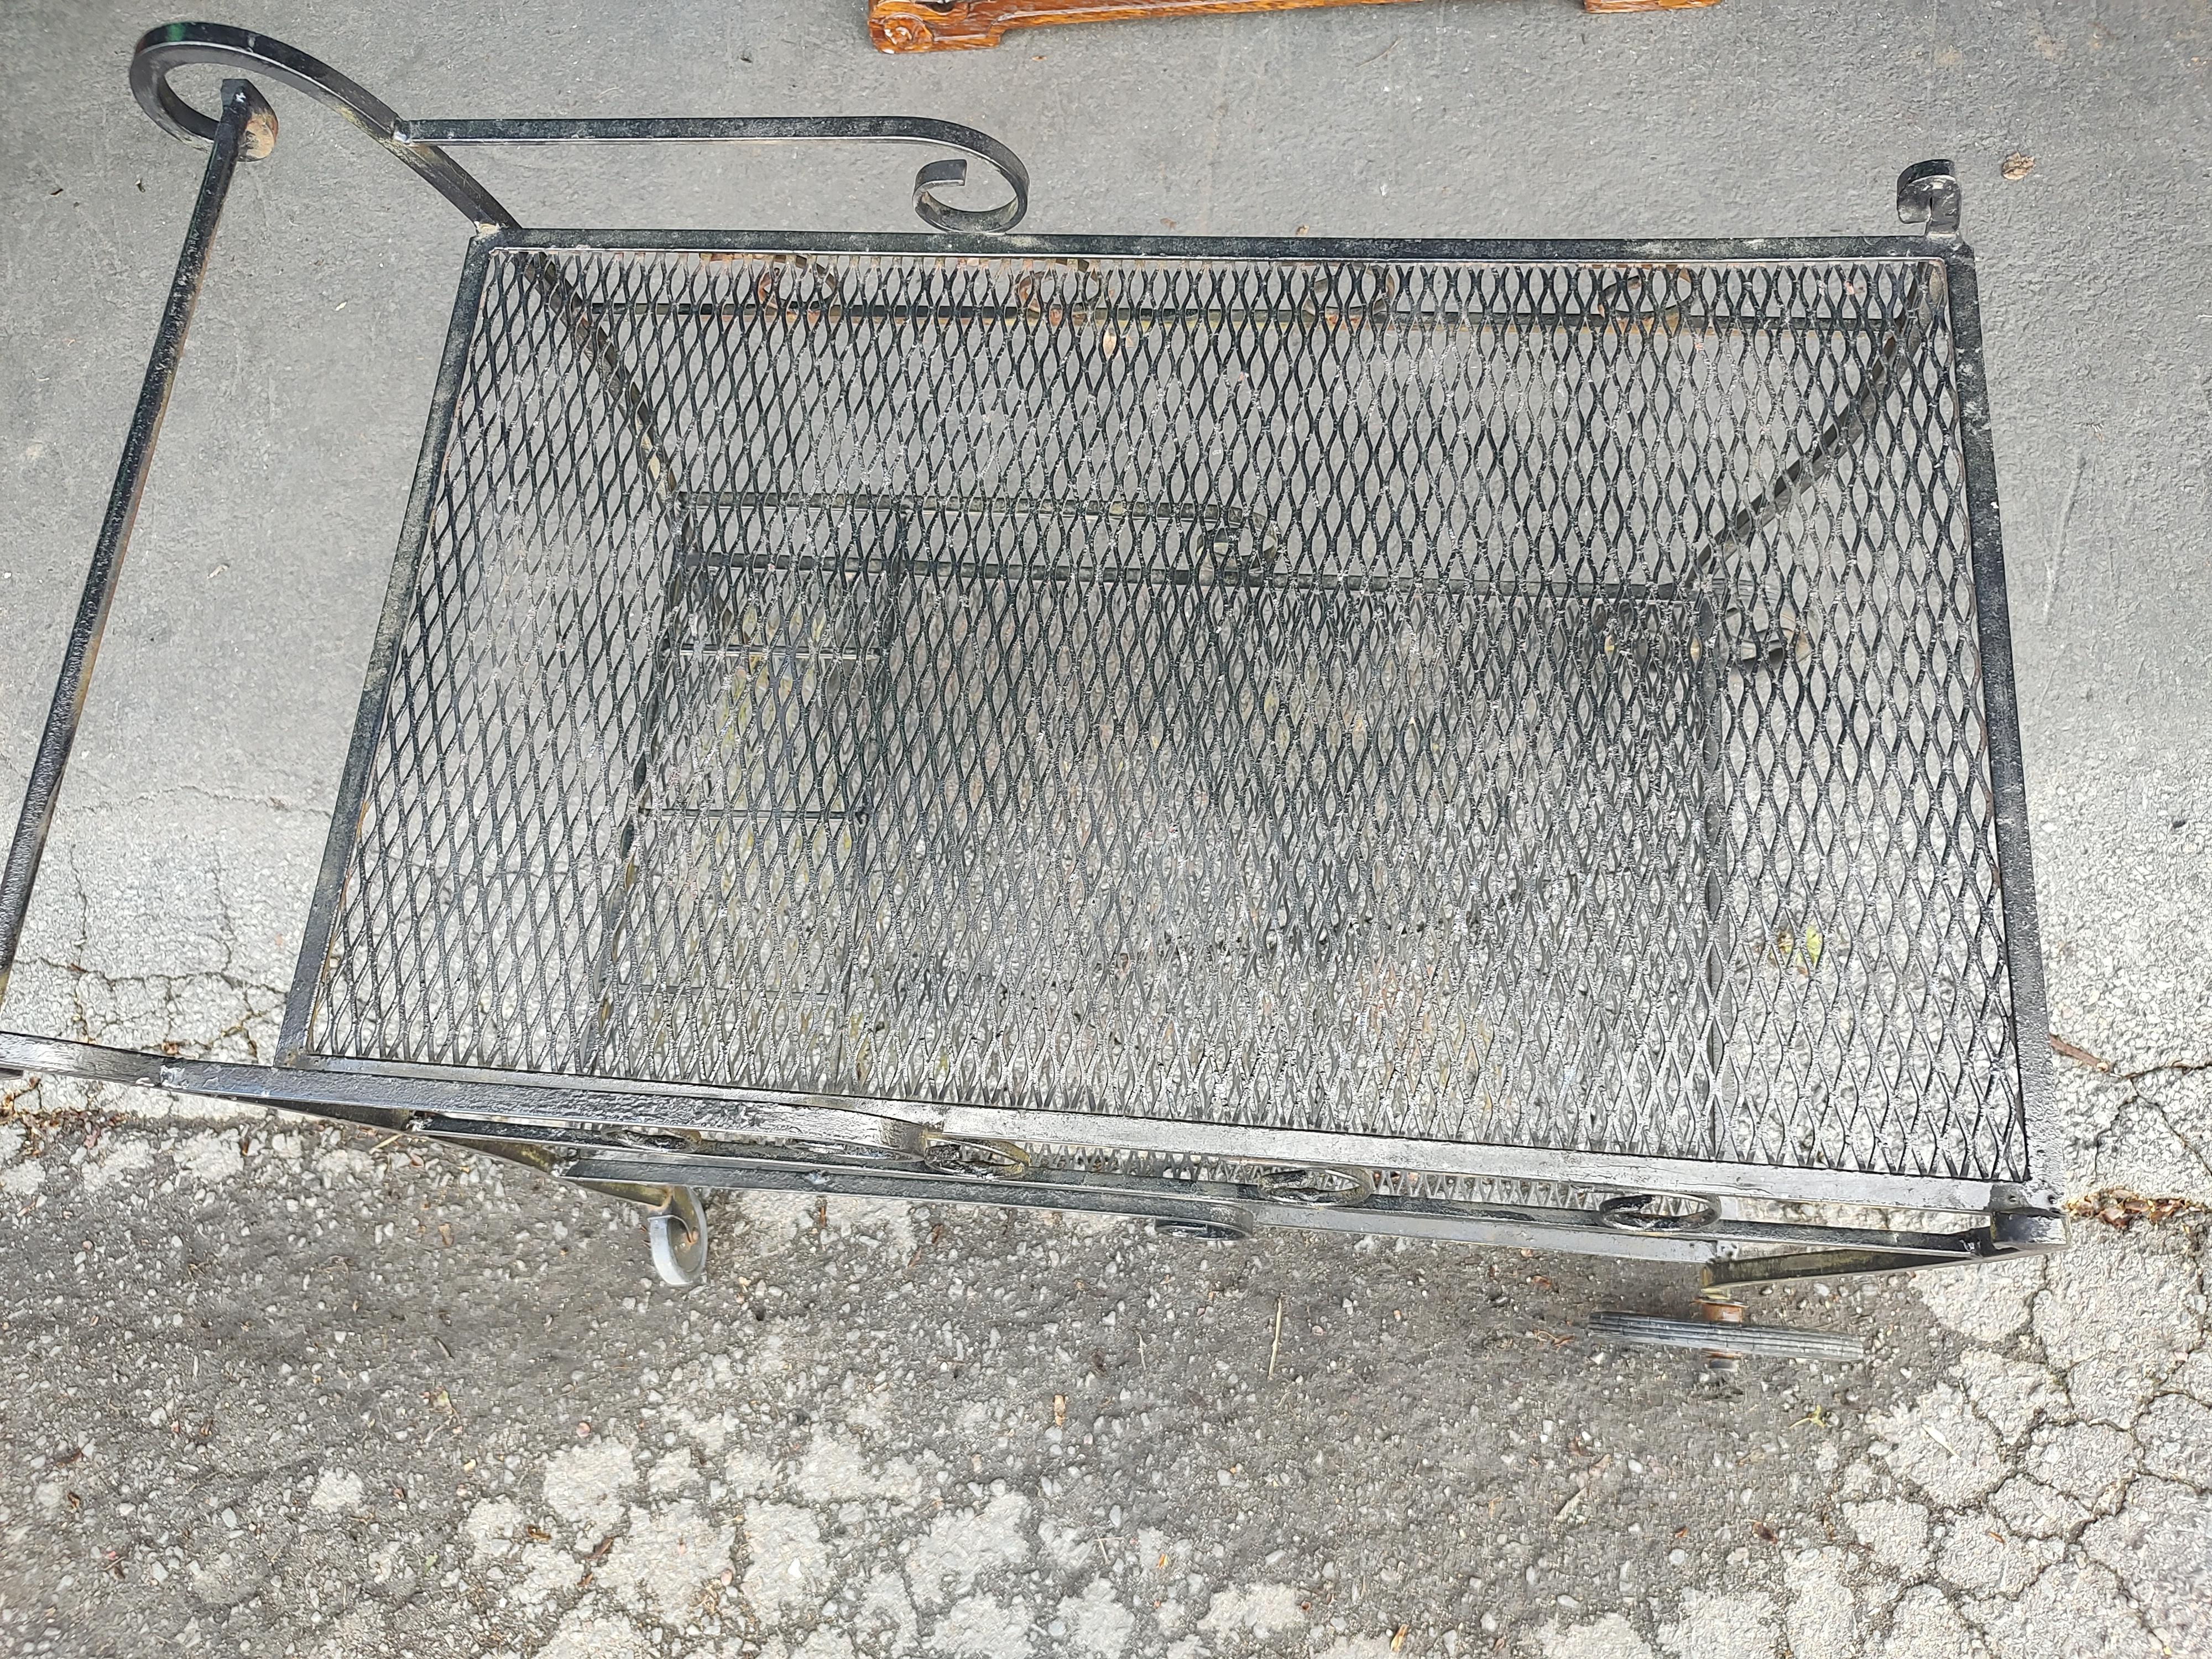 Mid-Century Modern Wrought Iron Outdoor Bar Cart with Liquor Bottle Holder In Good Condition For Sale In Port Jervis, NY